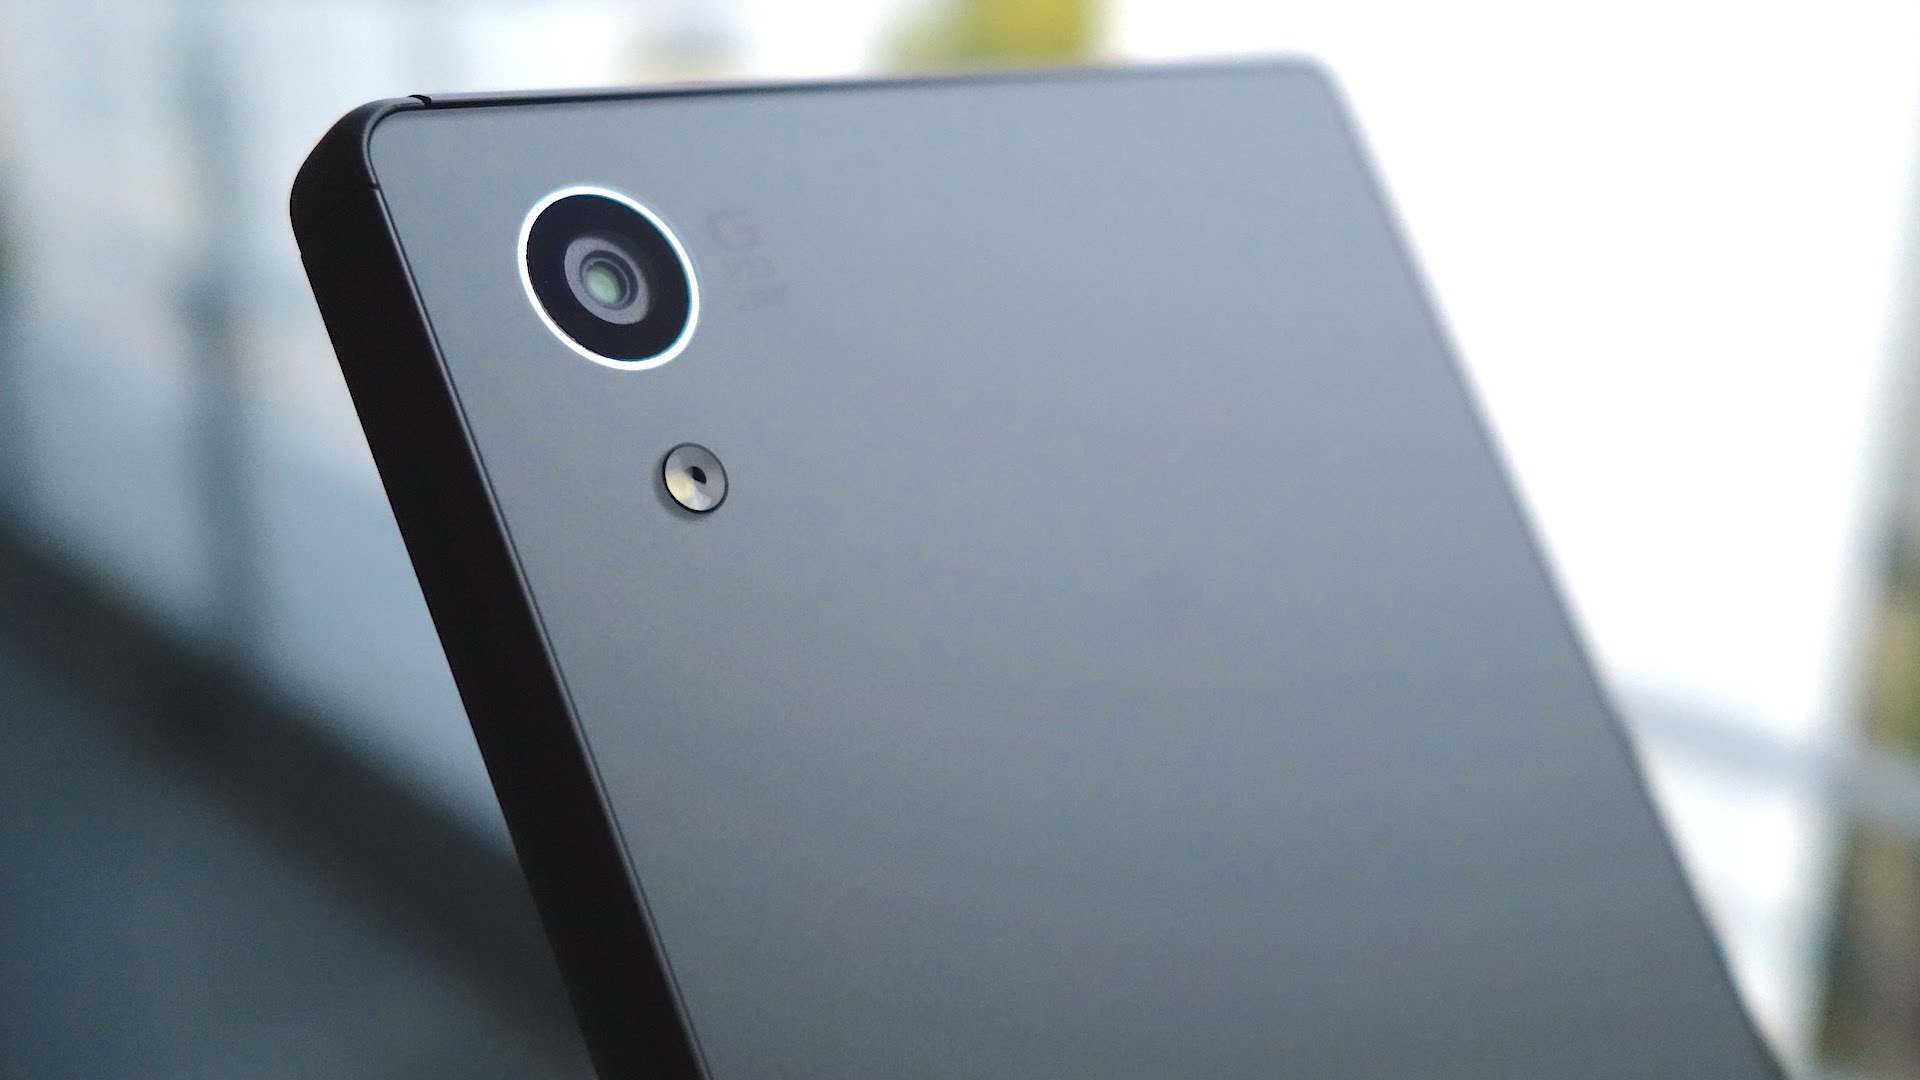 Deal Alert : Grab a Sony Xperia Z5 with $100 off 10